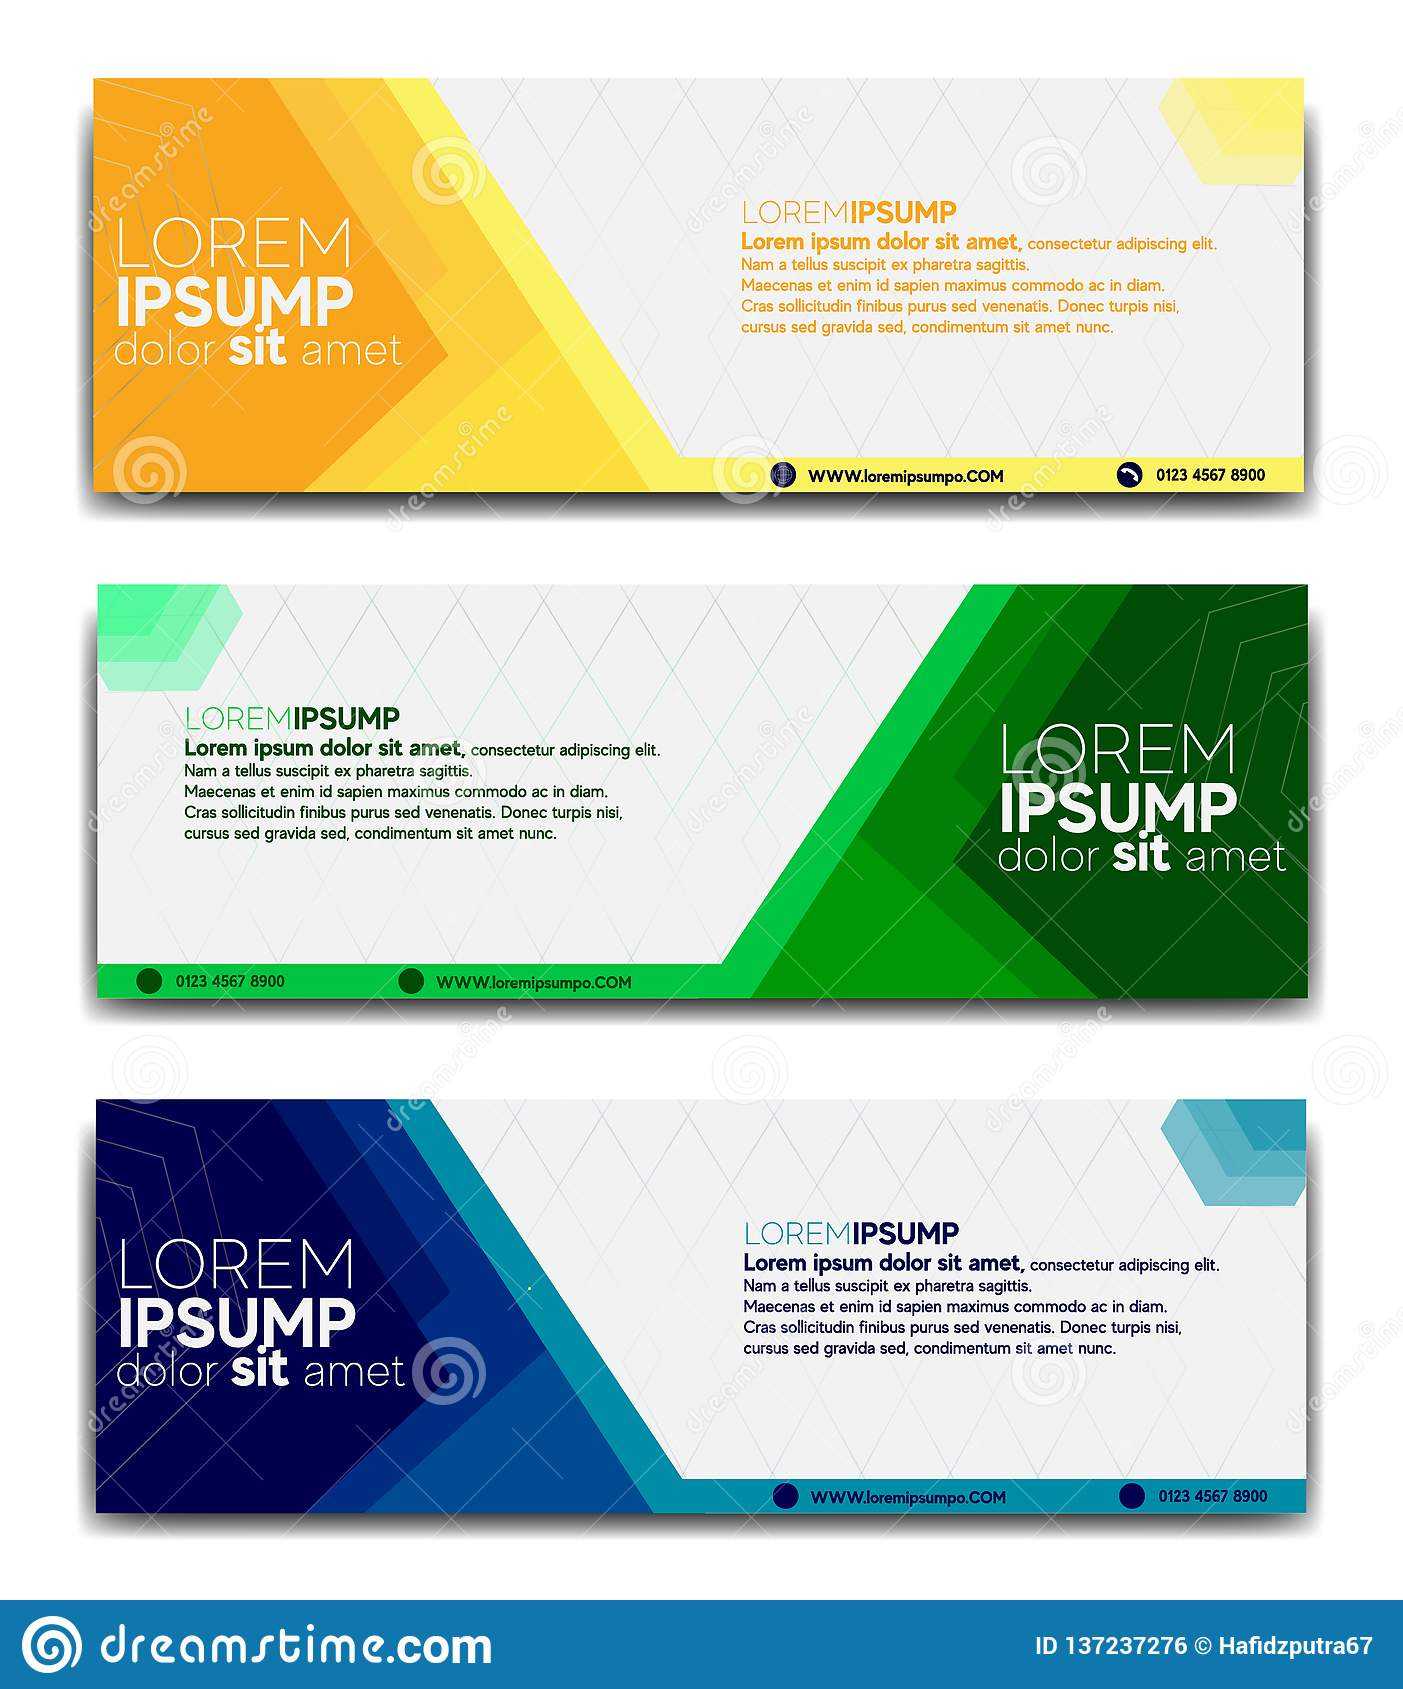 Promotional Banner Design Template 2019 Stock Vector With Free Online Banner Templates